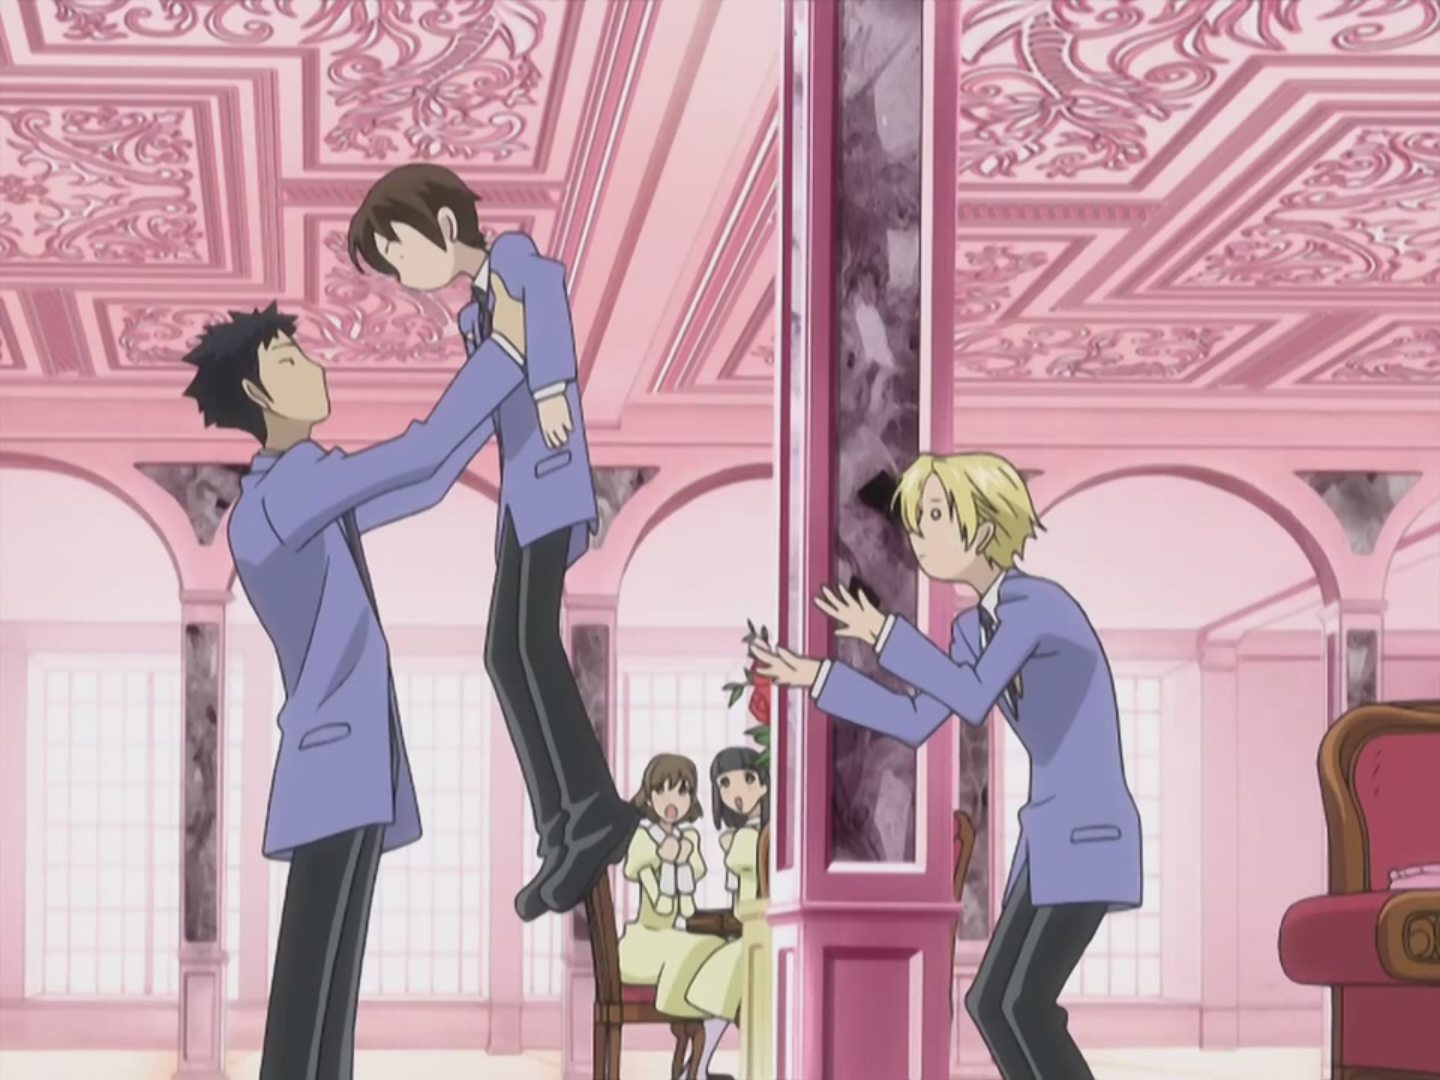 Ouran host